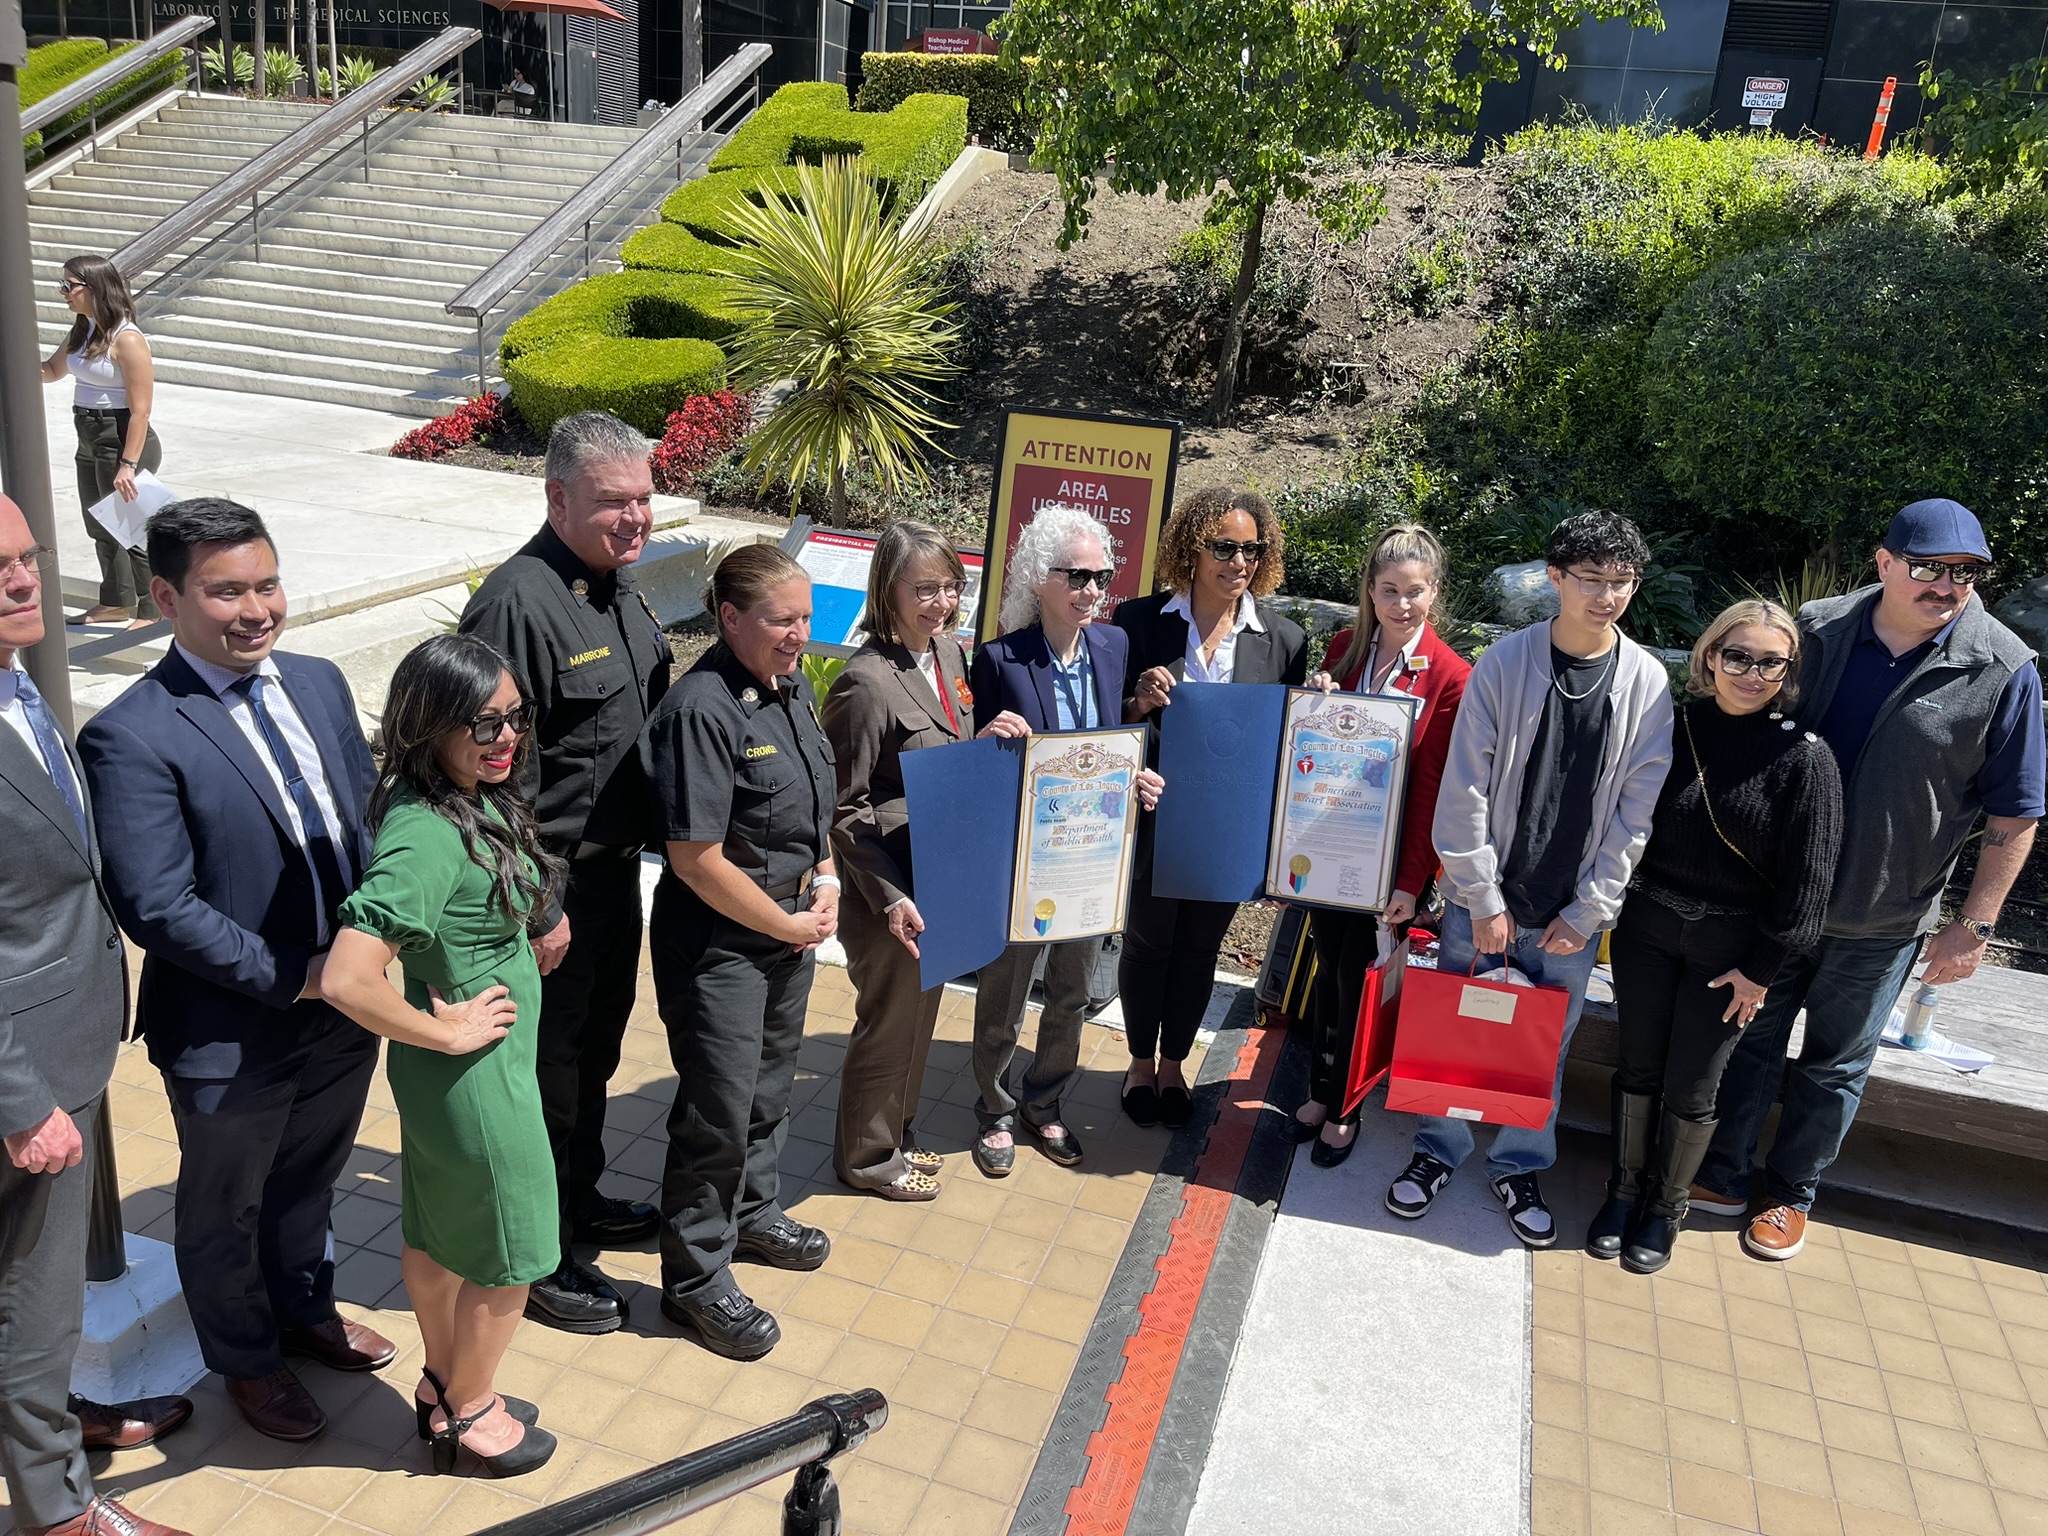 Officials including LAFD Fire Chief Crowley, LACoFD Fire Chief Marrone, LA County Medical Director Barbara Ferrer and others pose for a photo at the event